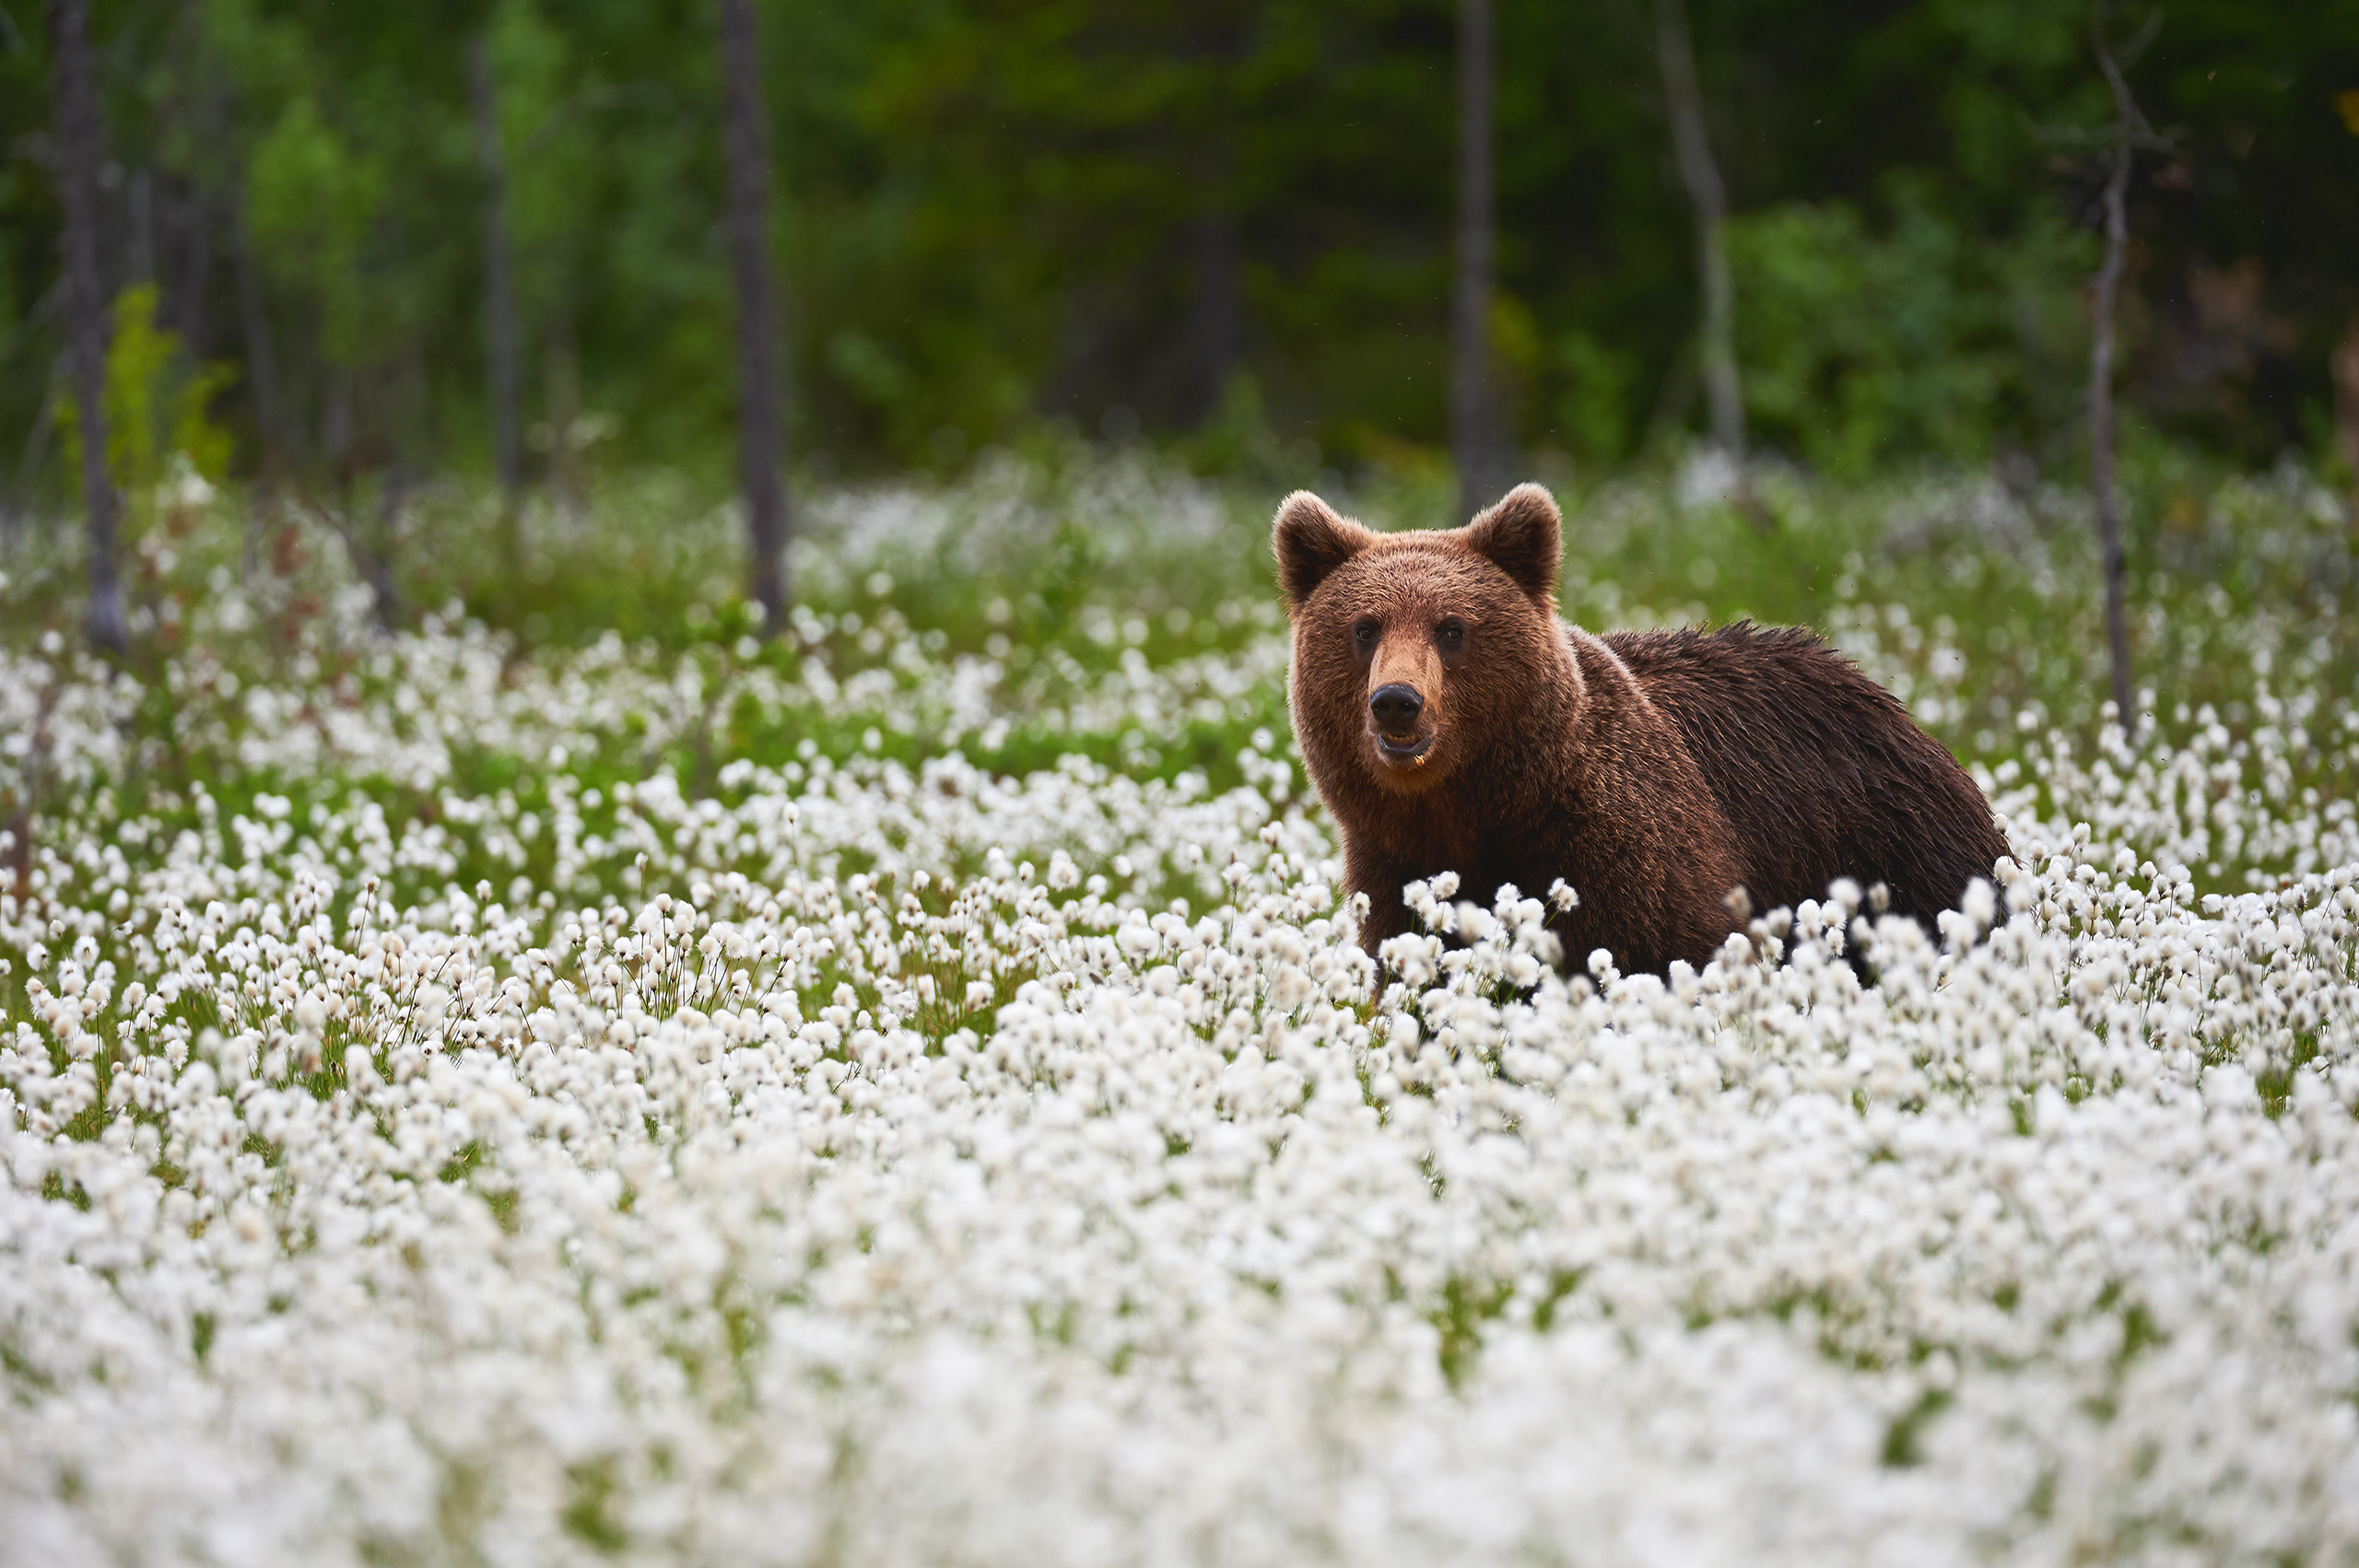 Grizzly bear in a field of white flowers